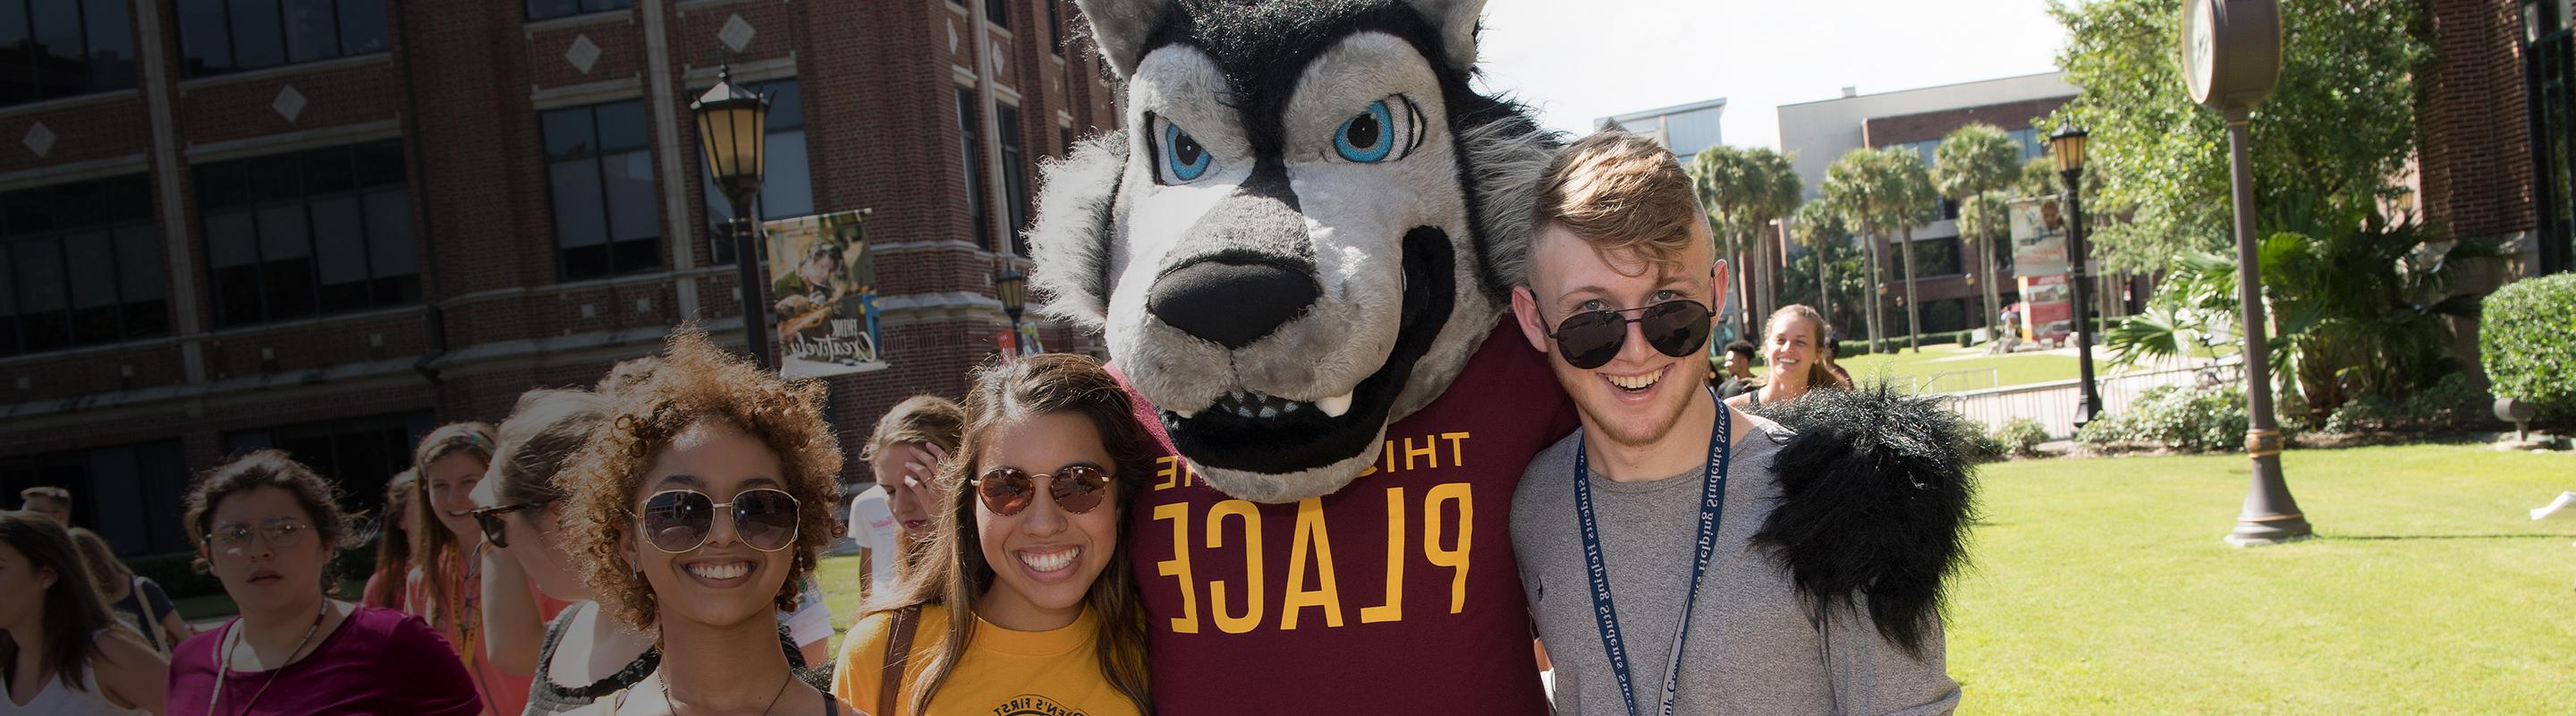 Group of smiling students with wolf mascot Havoc